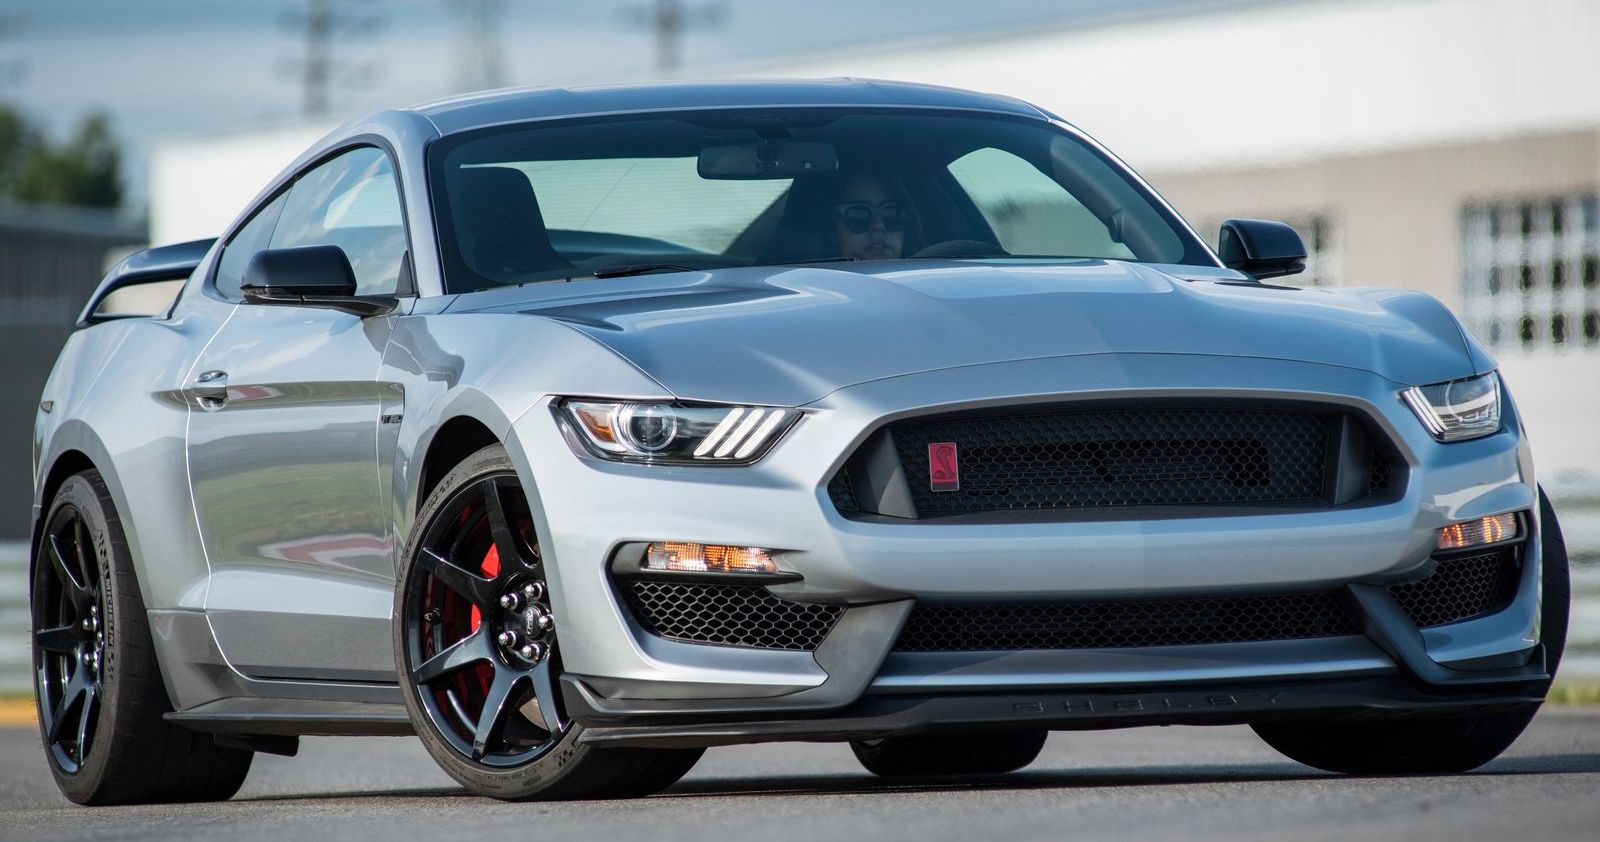 Silver 2020 Ford Mustang Shelby Gt350 Driving Around Town